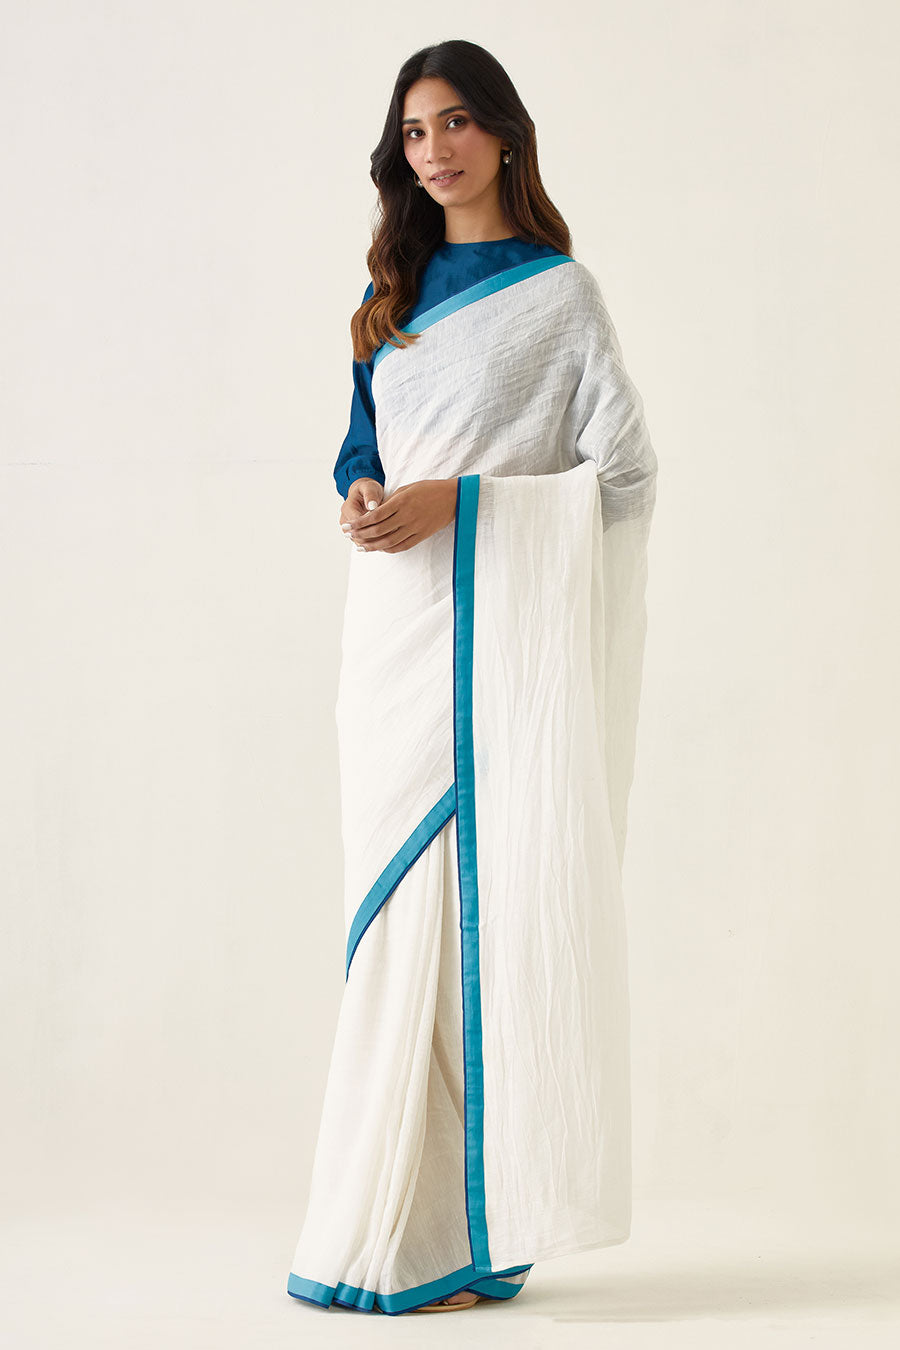 Handcrafted White Saree & Teal Blouse Set